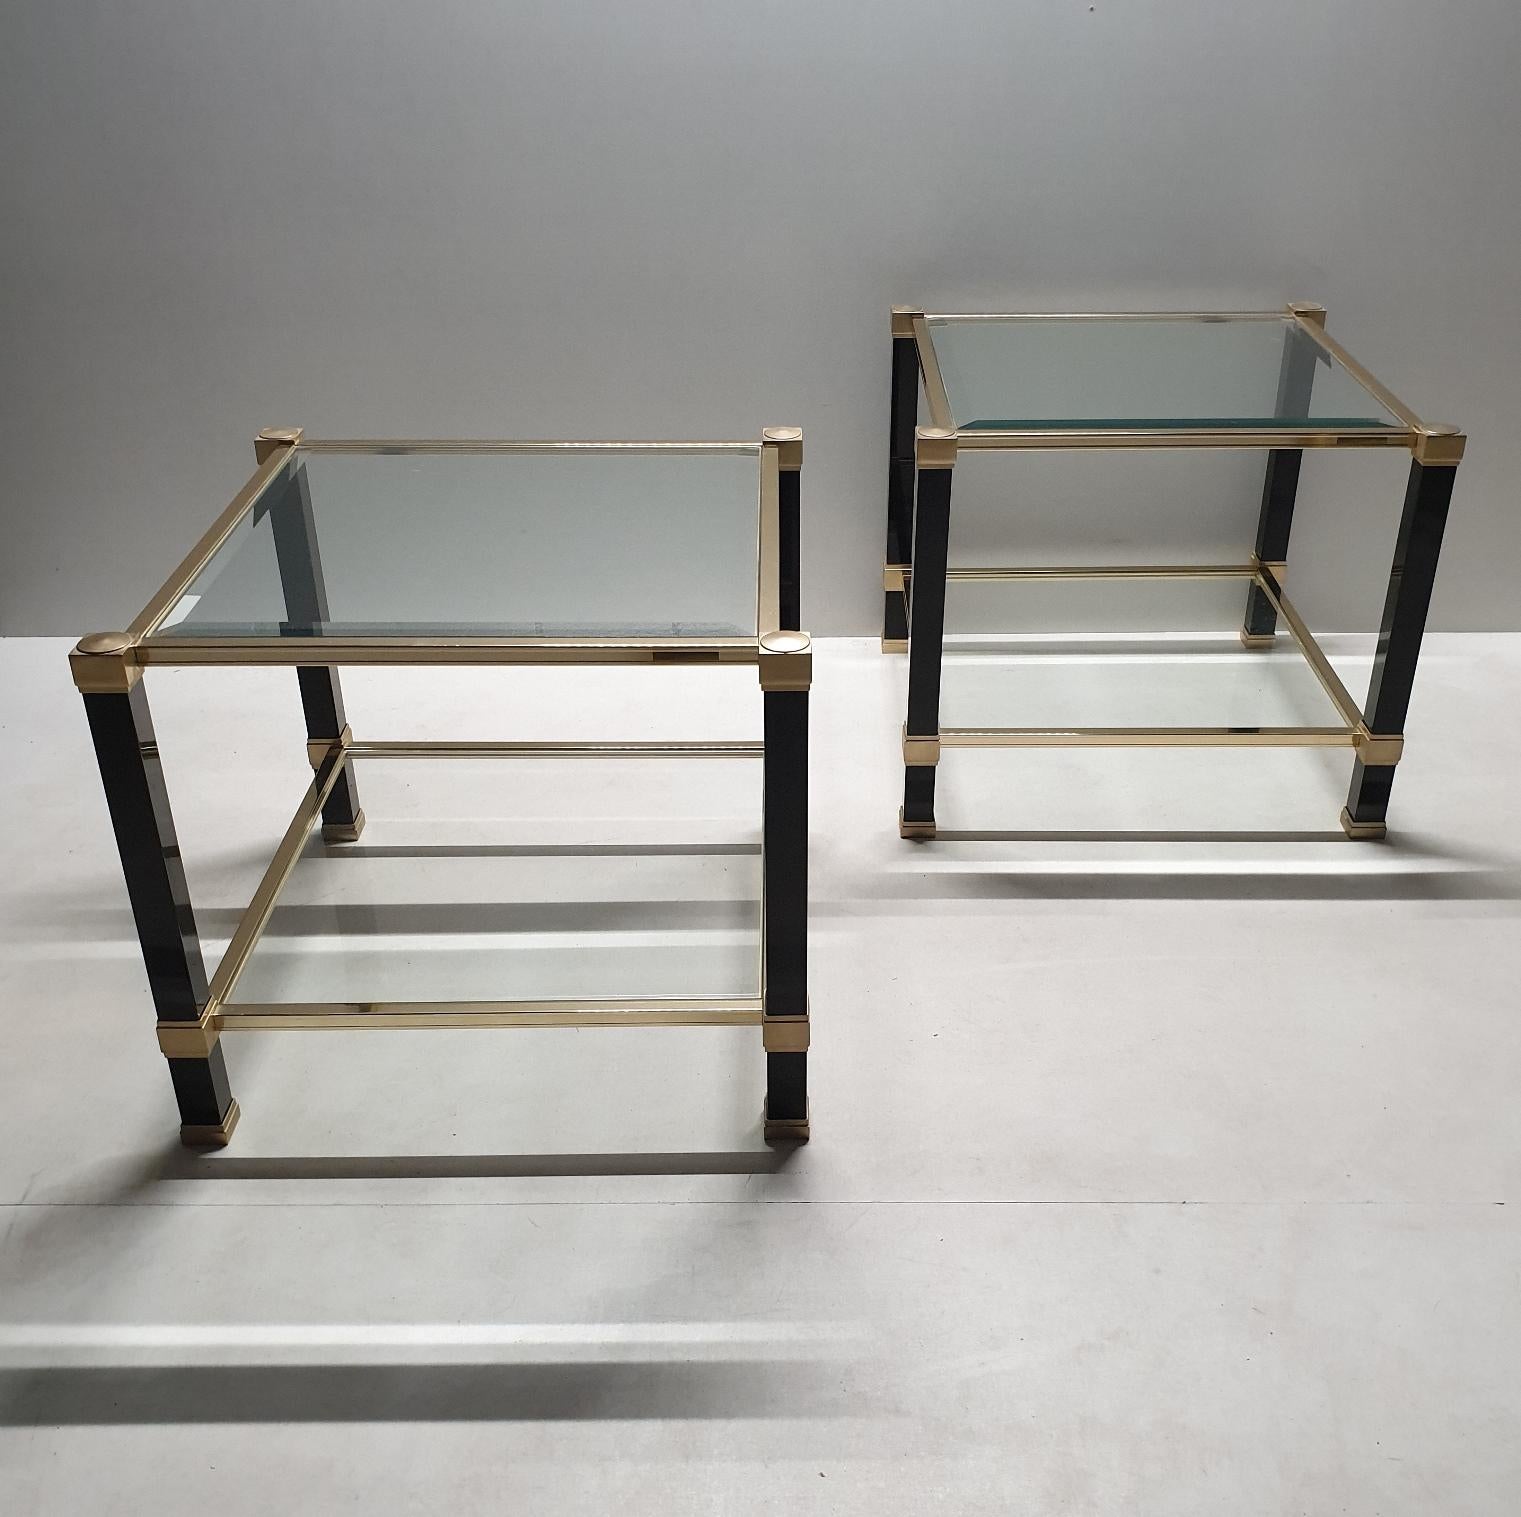 Hollywood Regency Pair of Brass 2-Tiers Square Site Tables by Pierre Vandel, 1980s, 1 Set of 2 For Sale